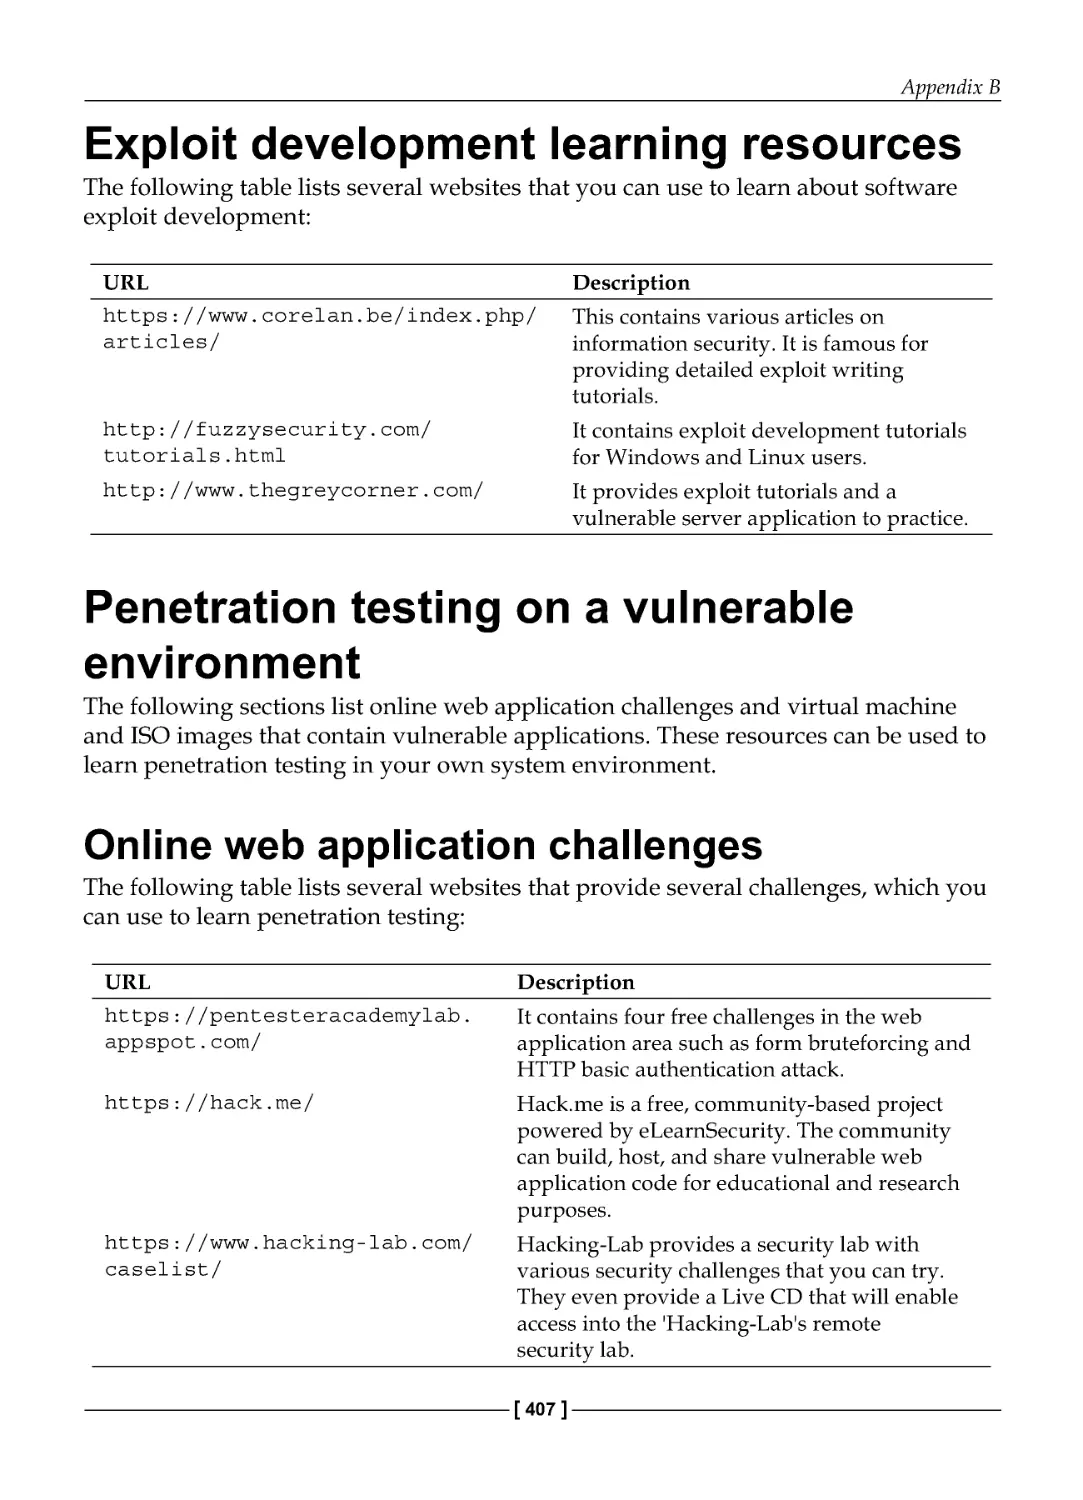 Exploit development learning resources
Penetration testing on a vulnerable environment